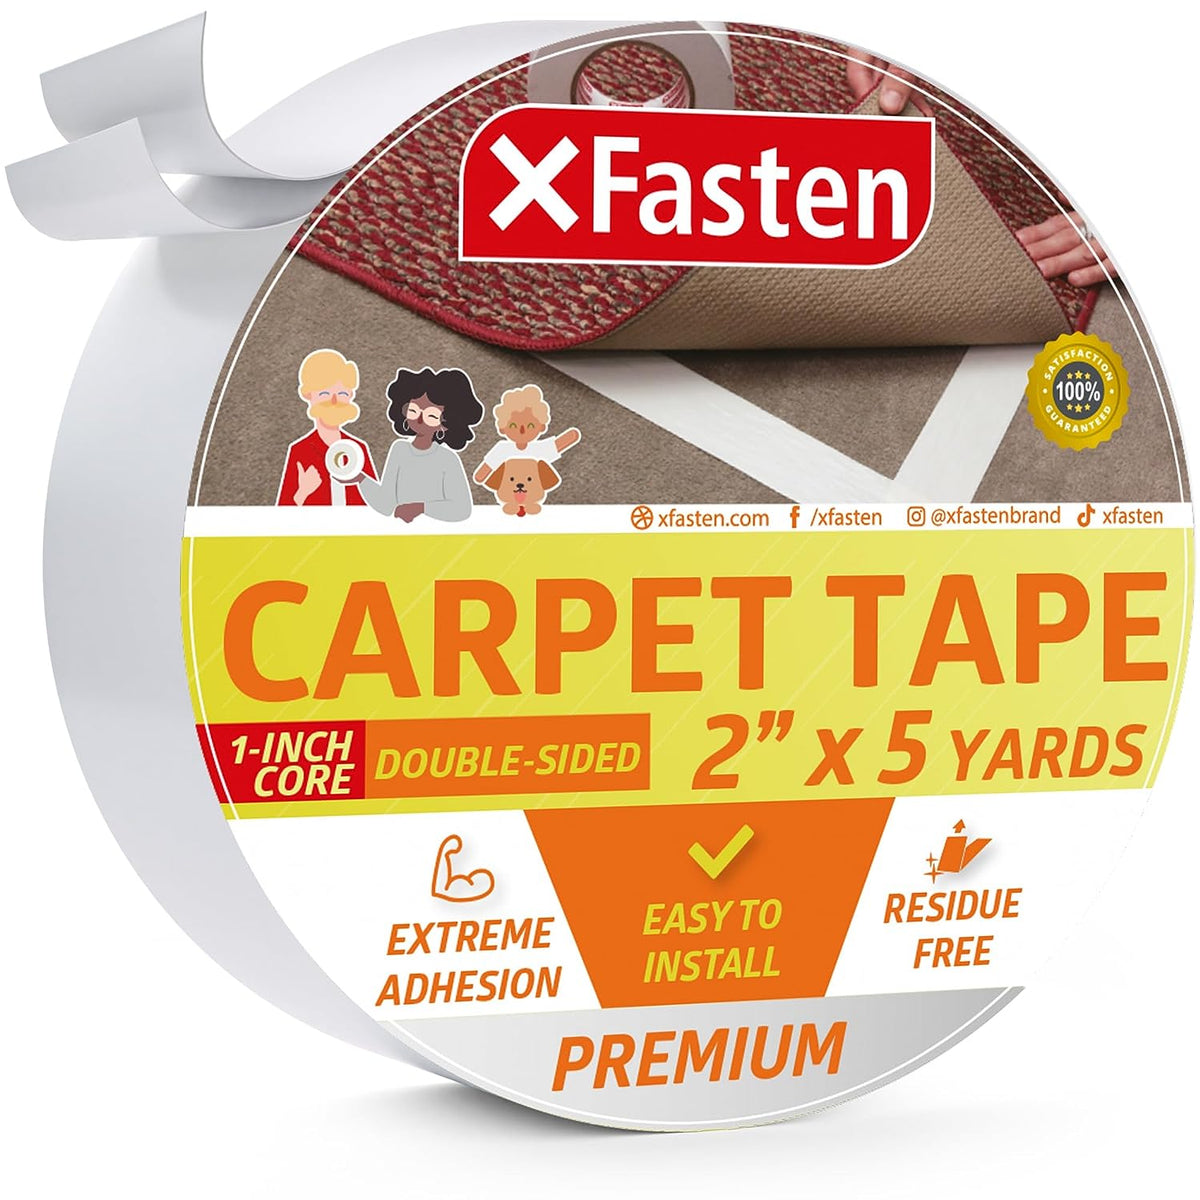 FR Double Sided Tape - Carpet Tape: FREE S&H No Min Order